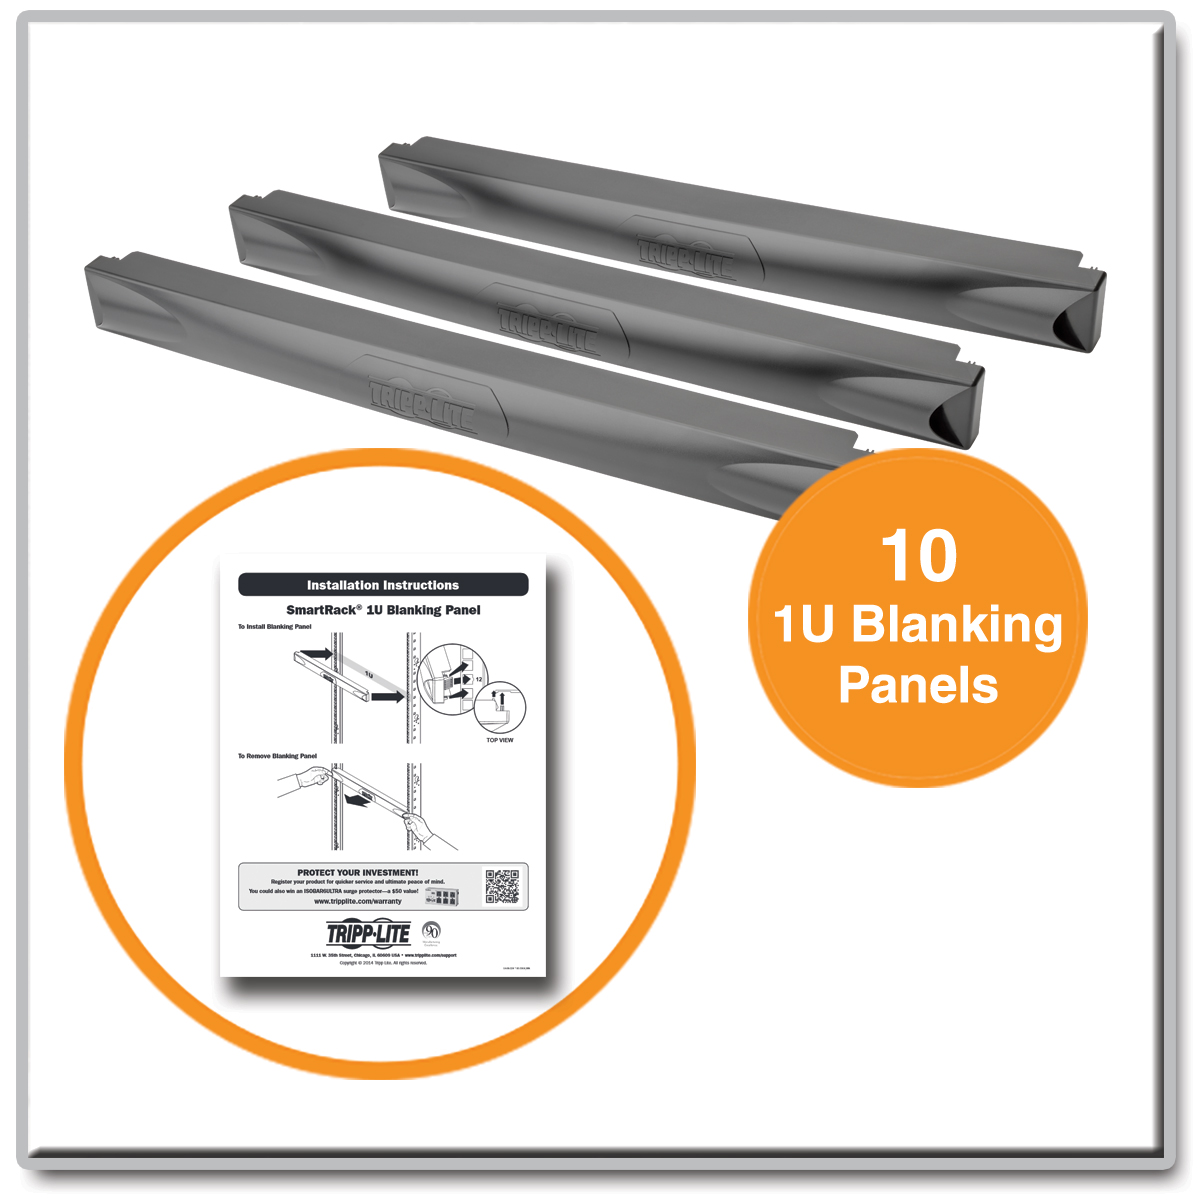 1U blanking panel kit Includes 10 panels Toolless snap-in mounting